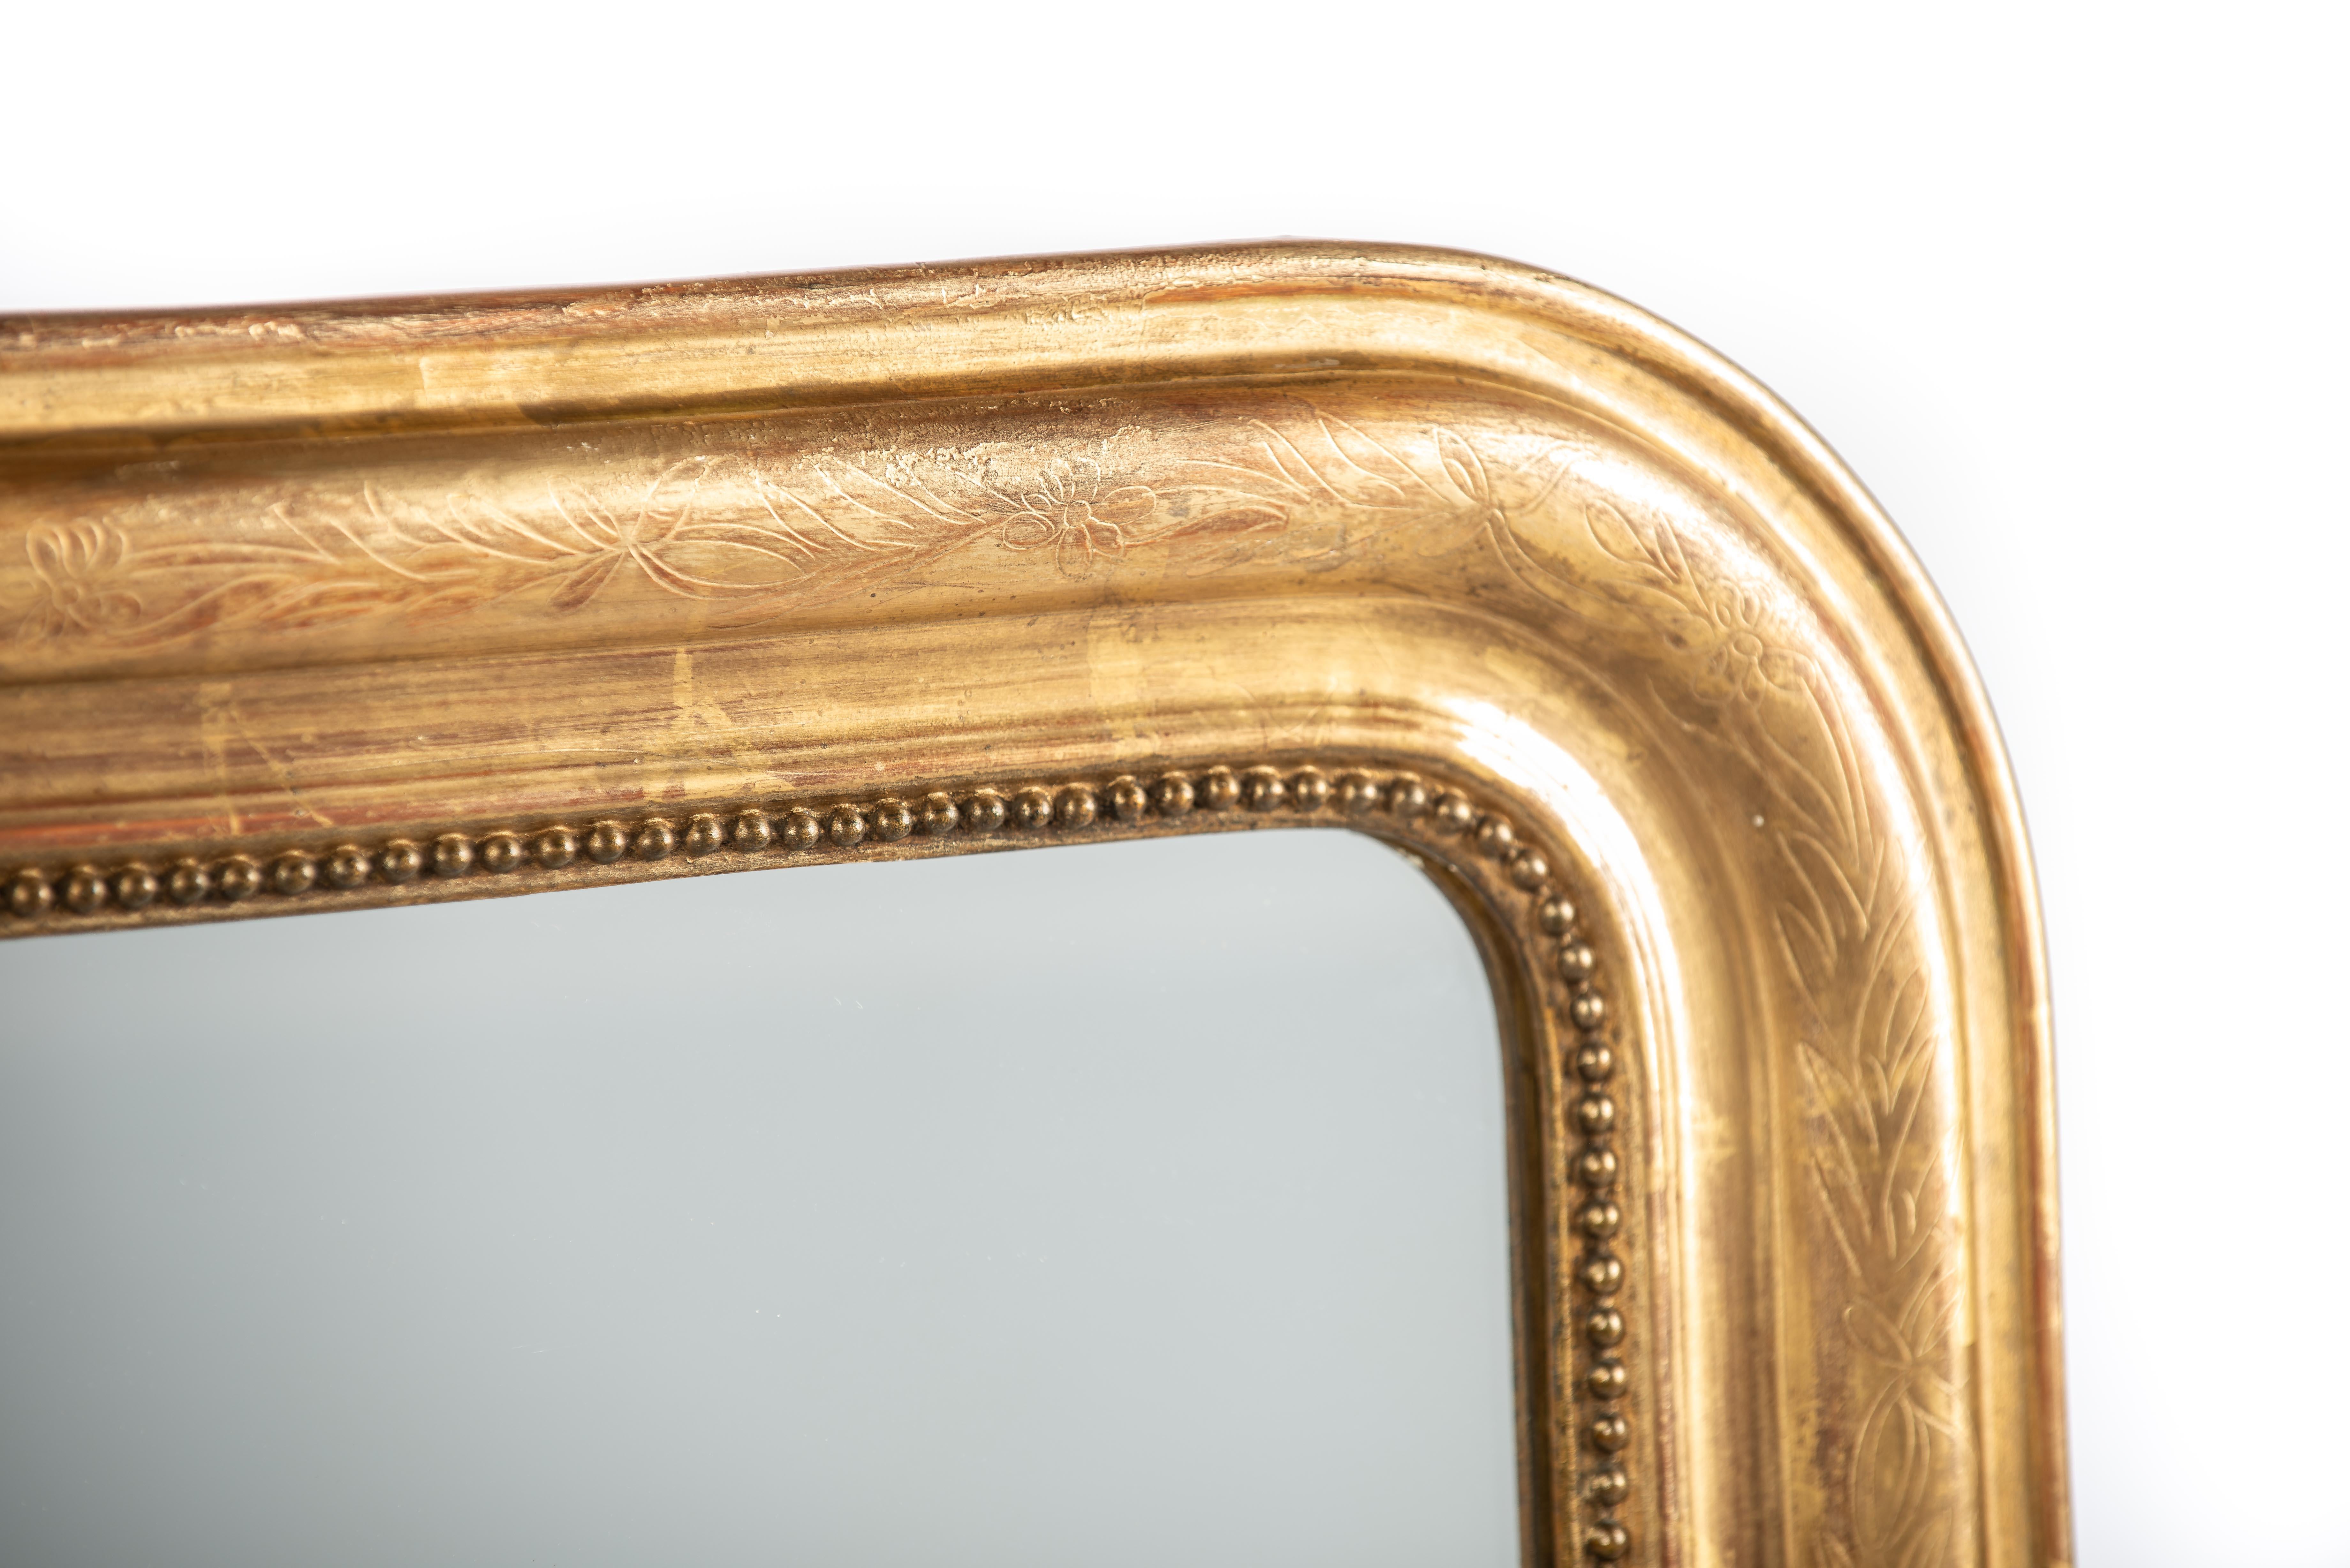 On offer here is a  beautiful antique mirror that was made in France in the late 19th century, circa 1890. It features the upper rounded corners that are typical for the French Louis Philippe style. The mirror has a solid pine frame that was